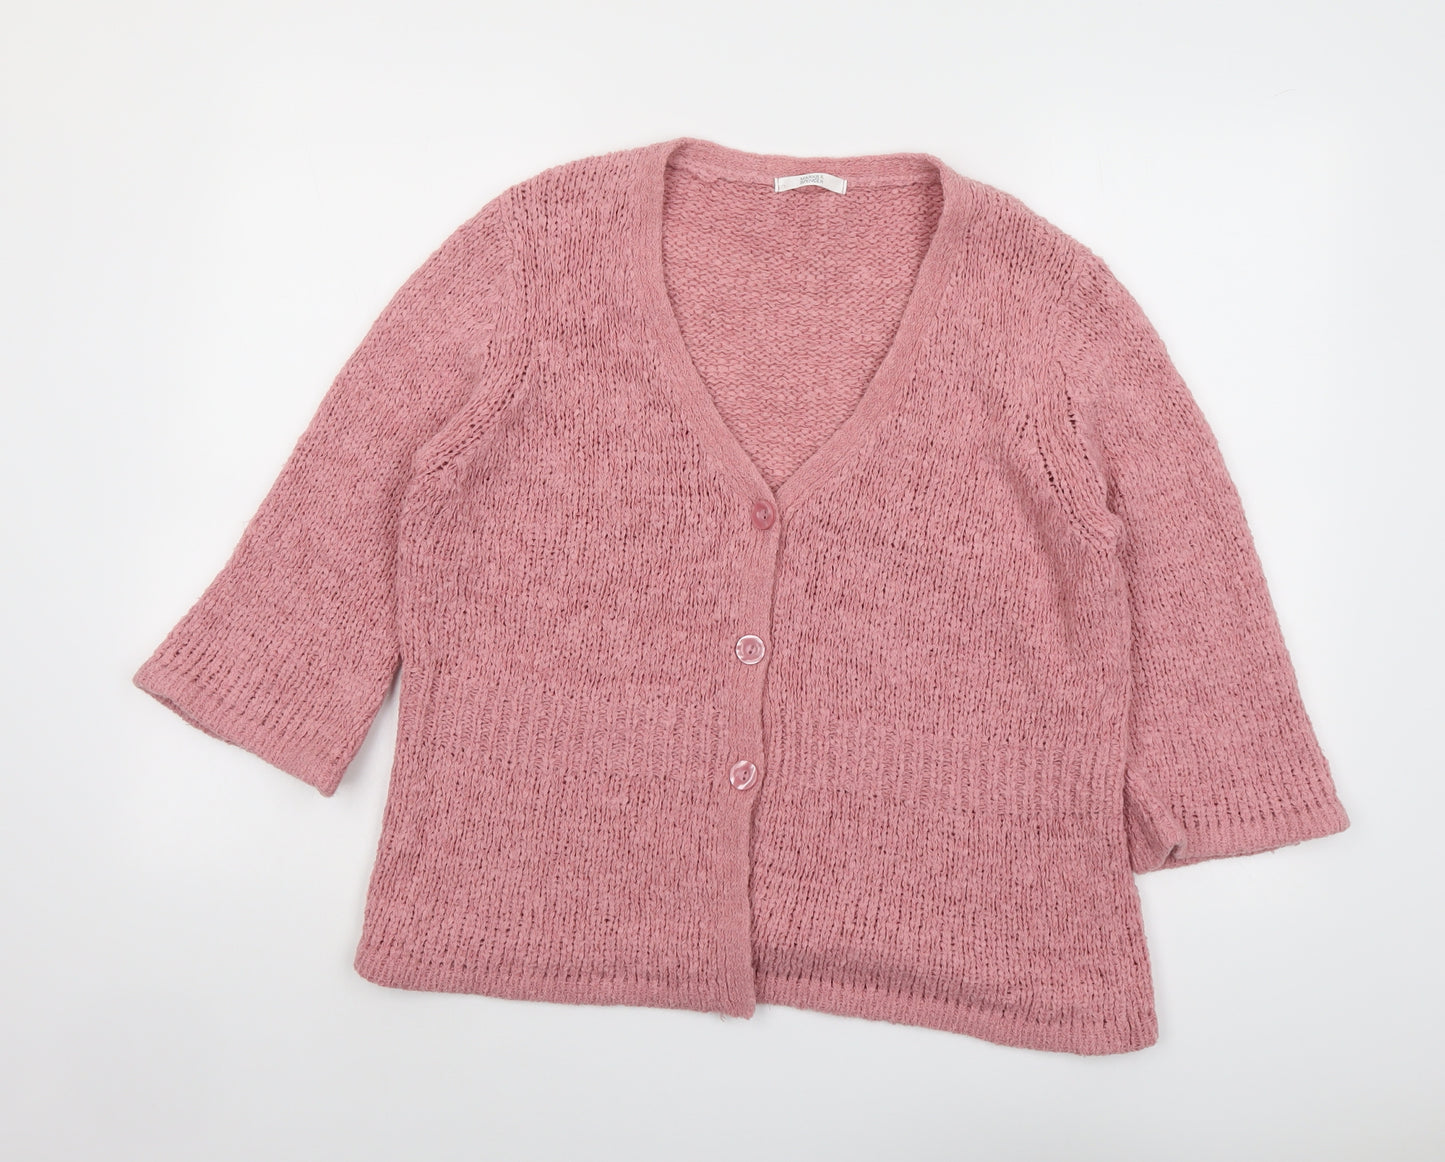 Marks and Spencer Womens Pink V-Neck Acrylic Cardigan Jumper Size 16